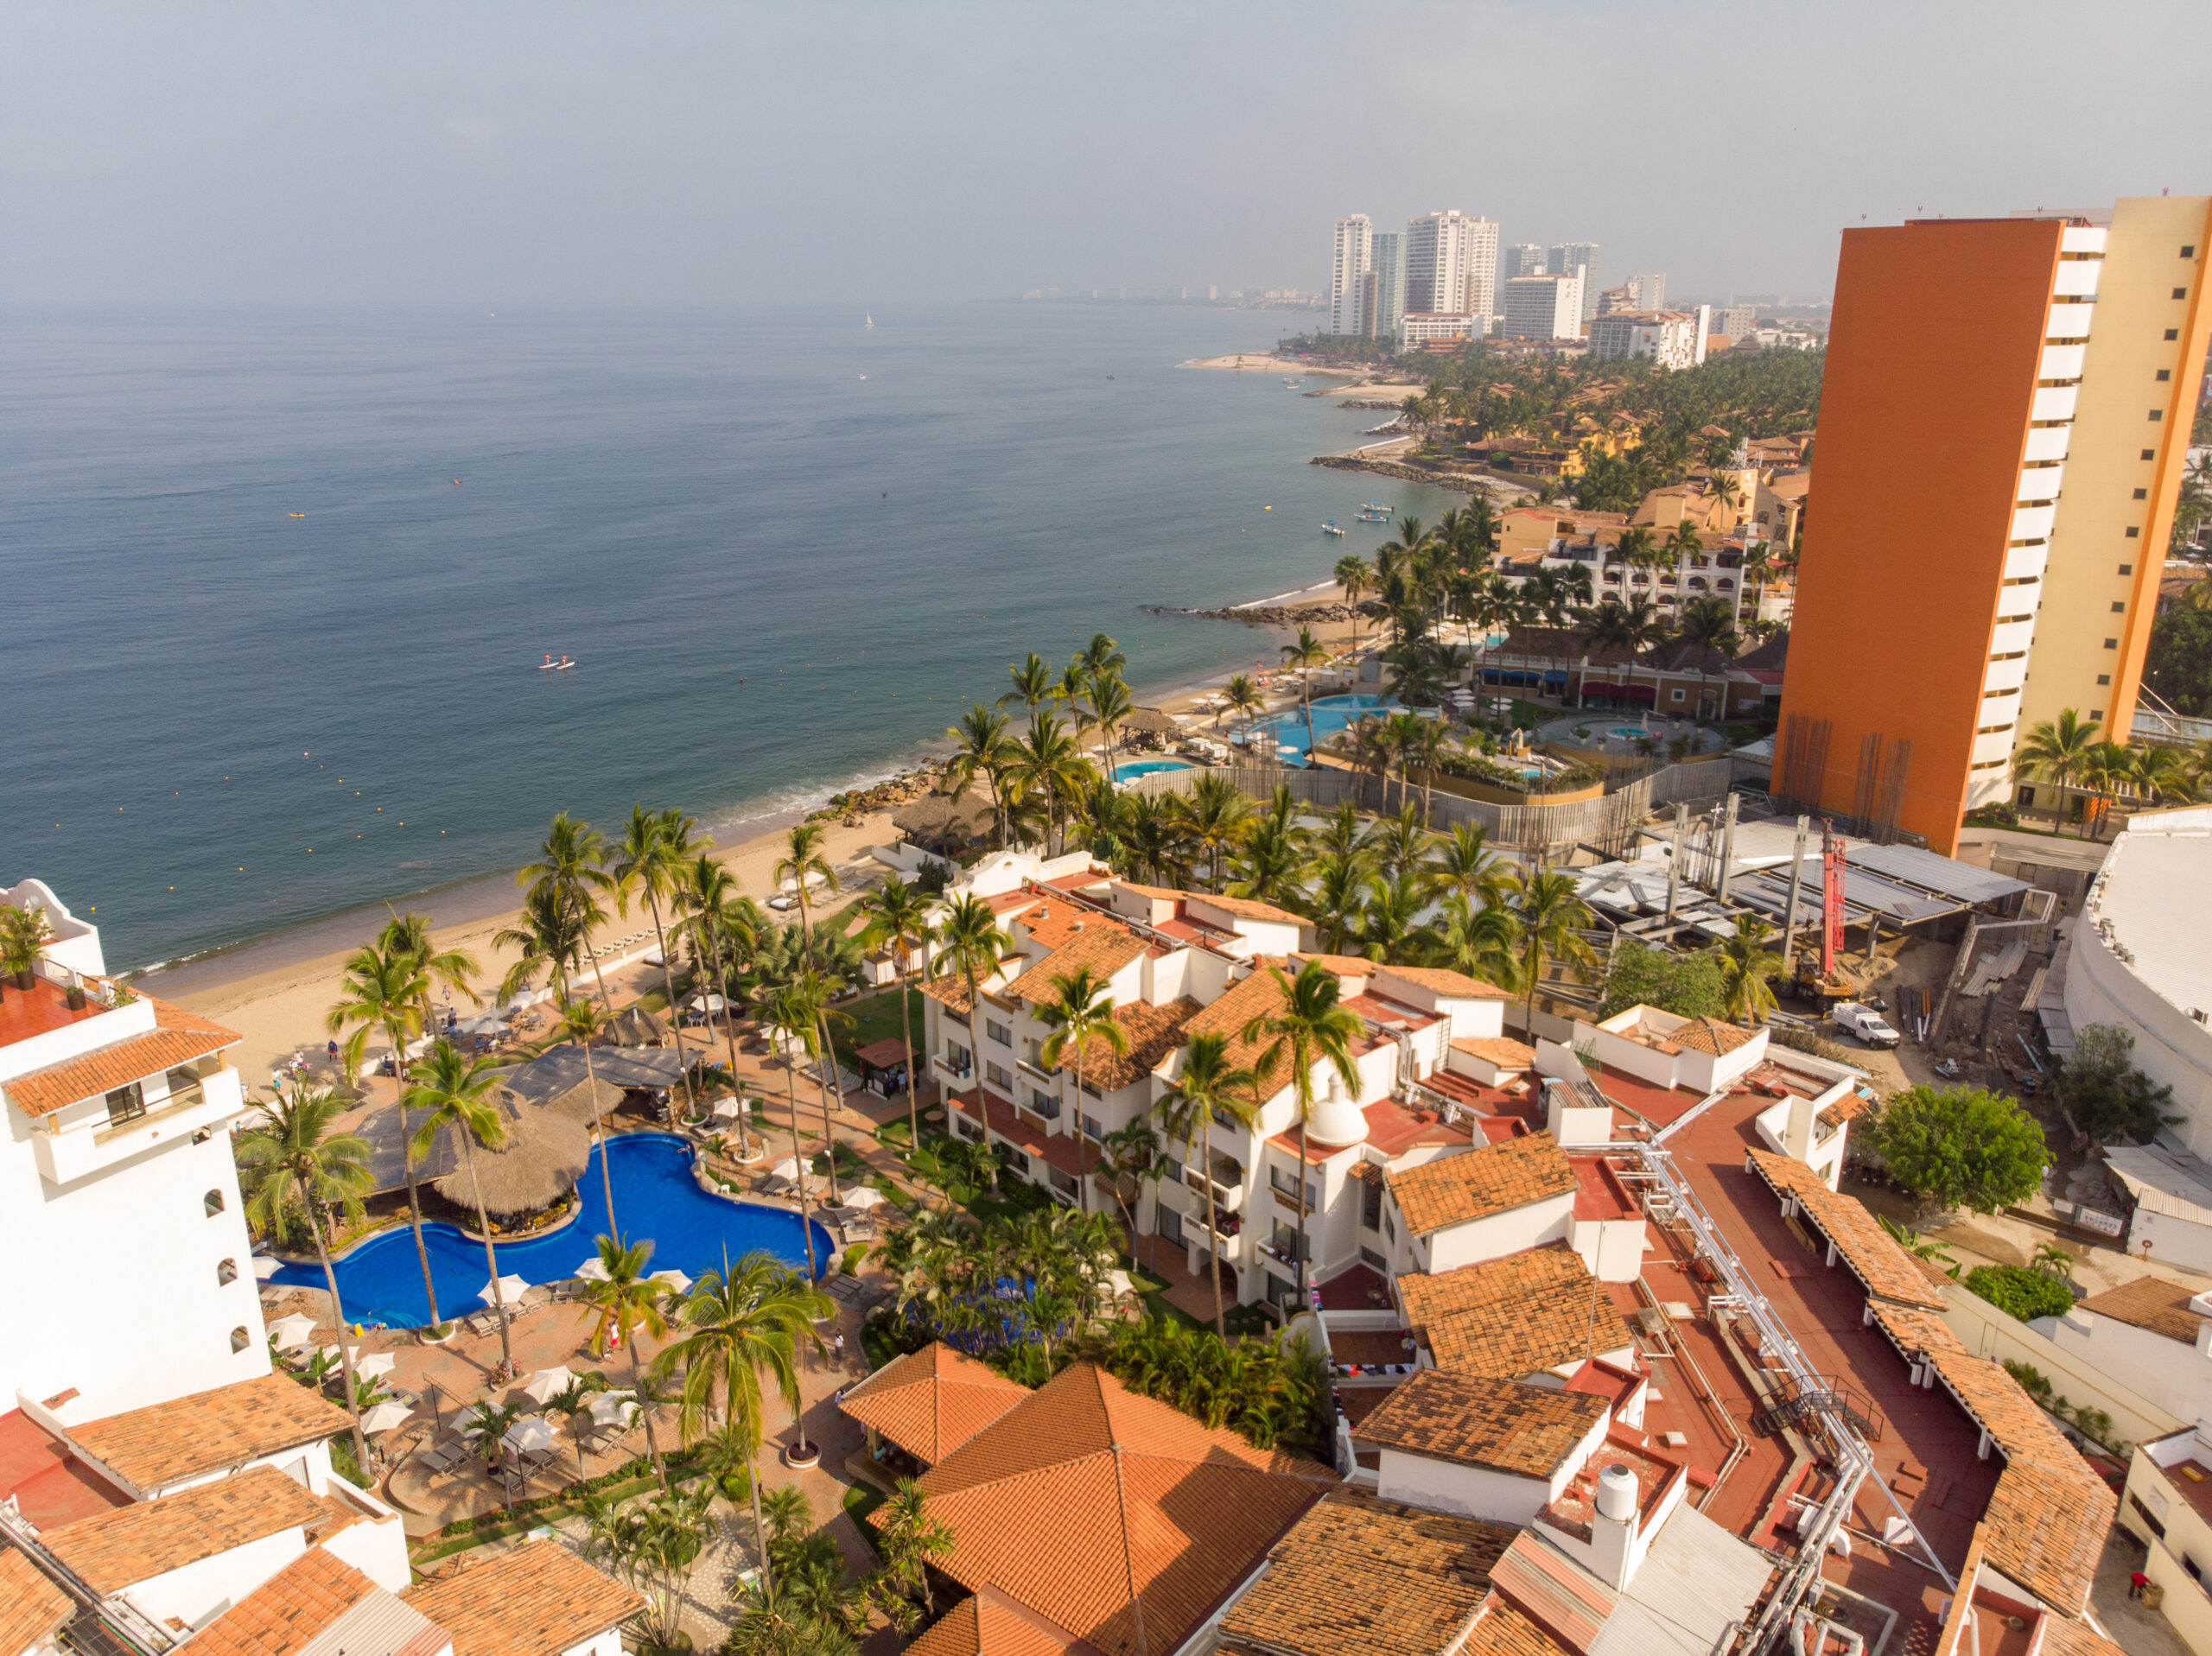 Adults Only Resorts in Puerto Vallarta to Spark a Little Romance - Aerial View of Puerto Vallarta